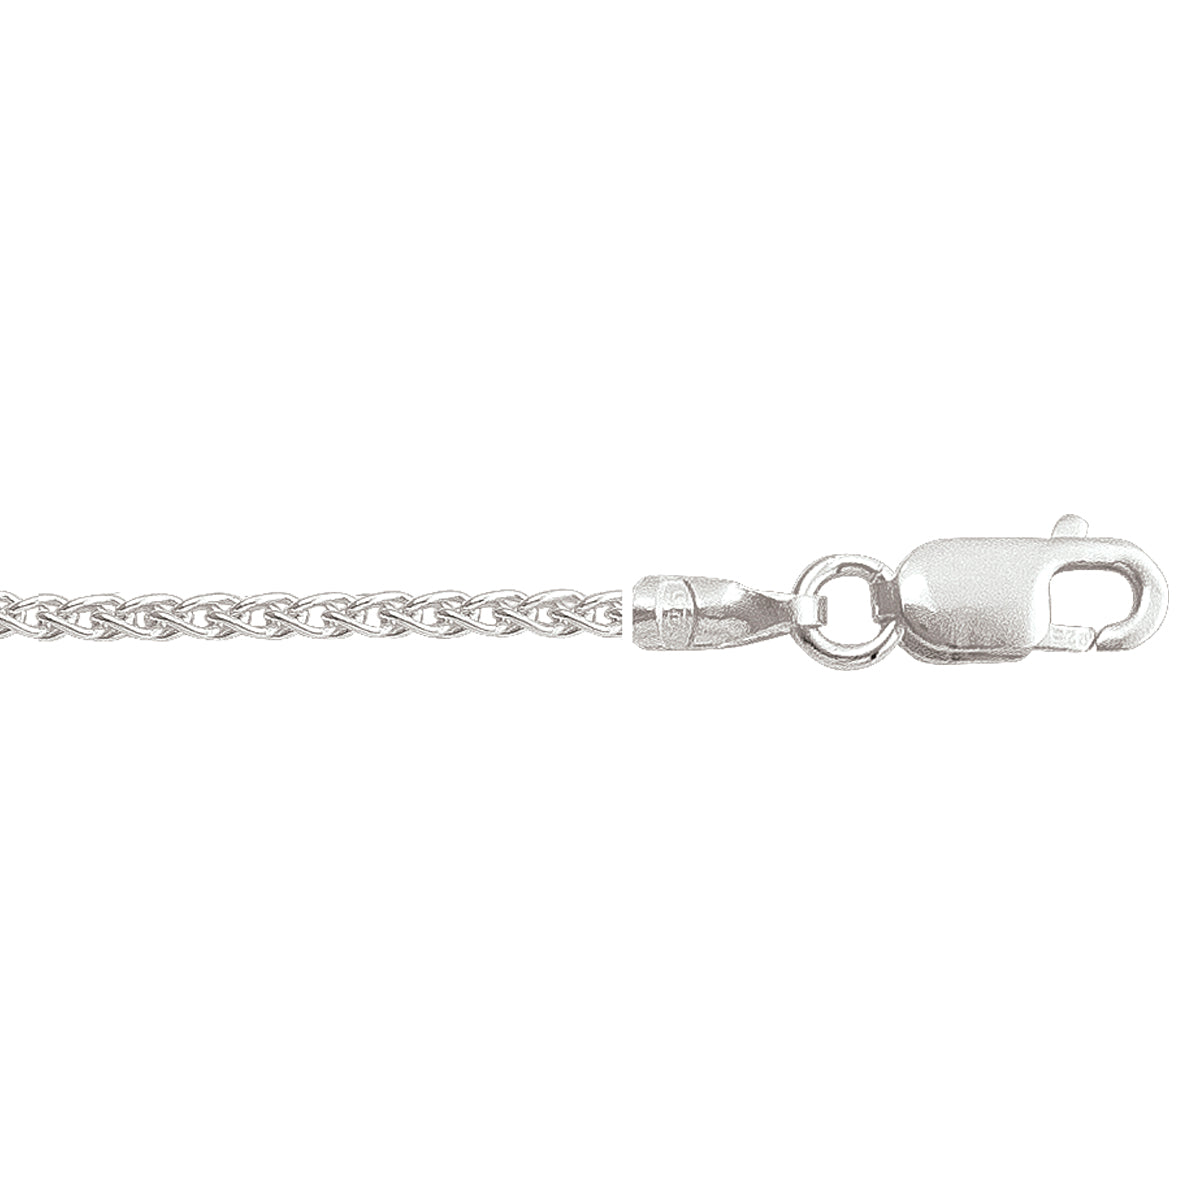 CHAINS SILVER SOLID ROUND WHEAT LINK 